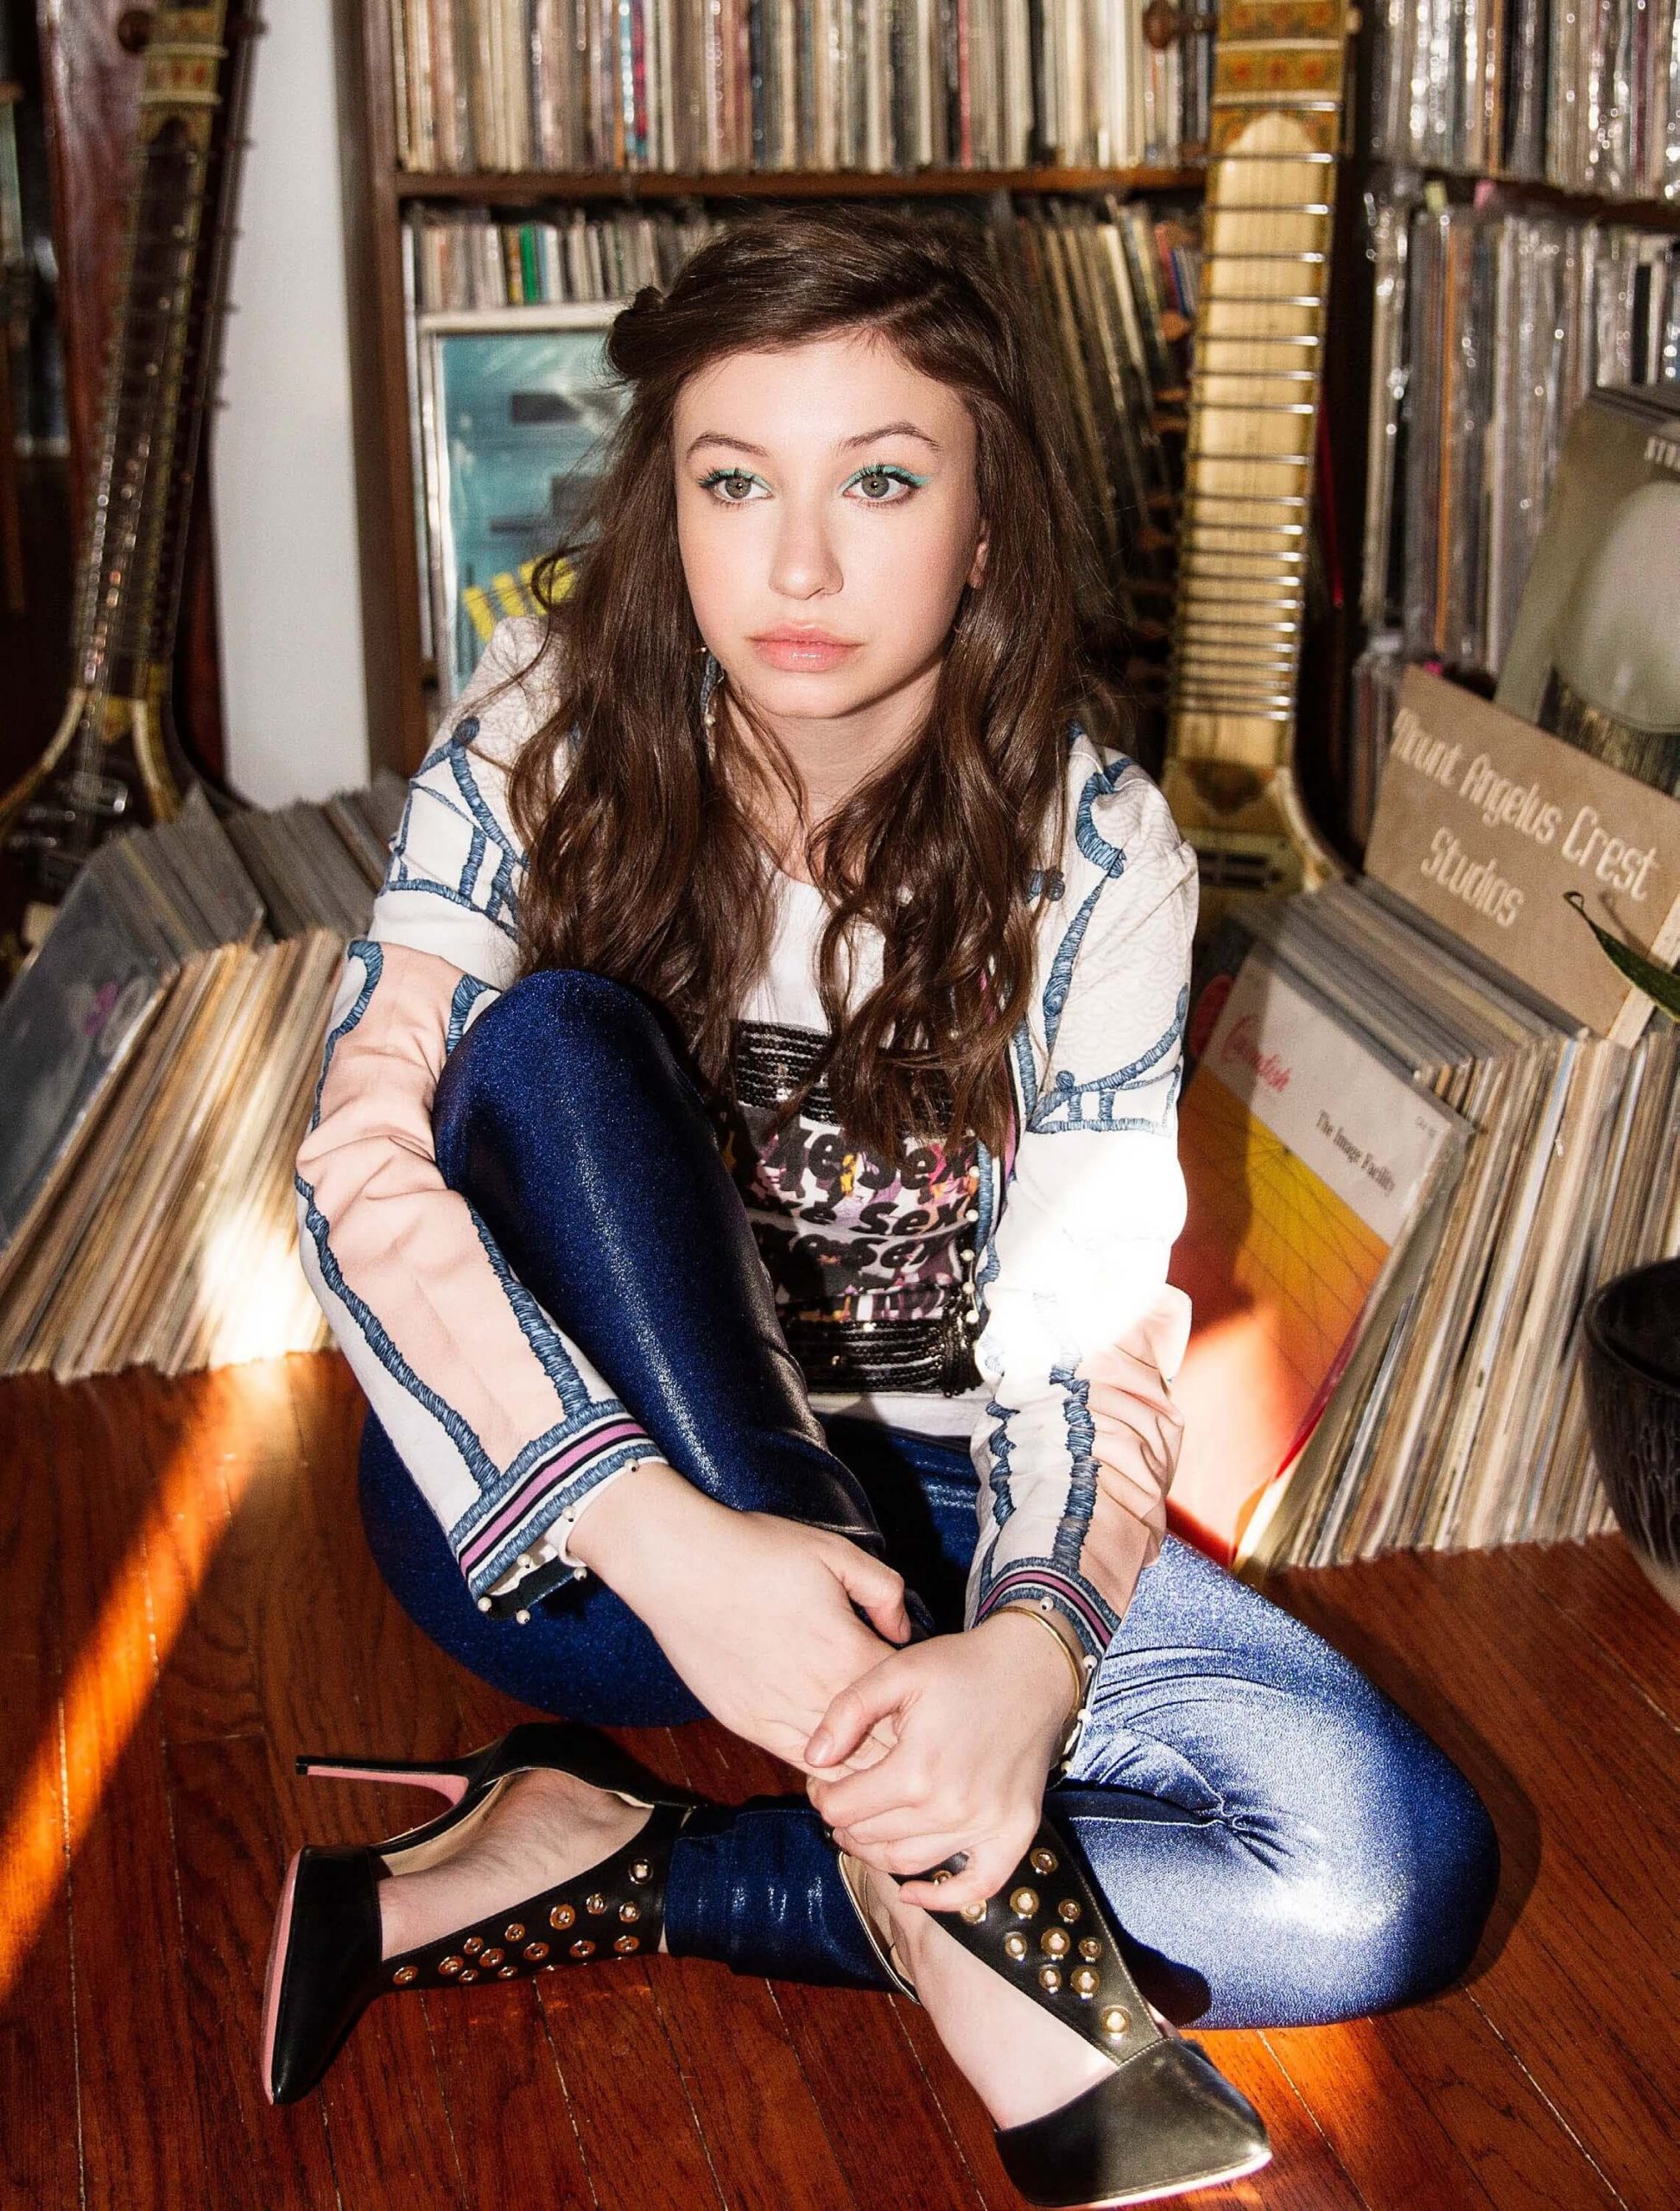 50 Katelyn Nacon Nude Pictures Which Prove Beauty Beyond Recognition 397